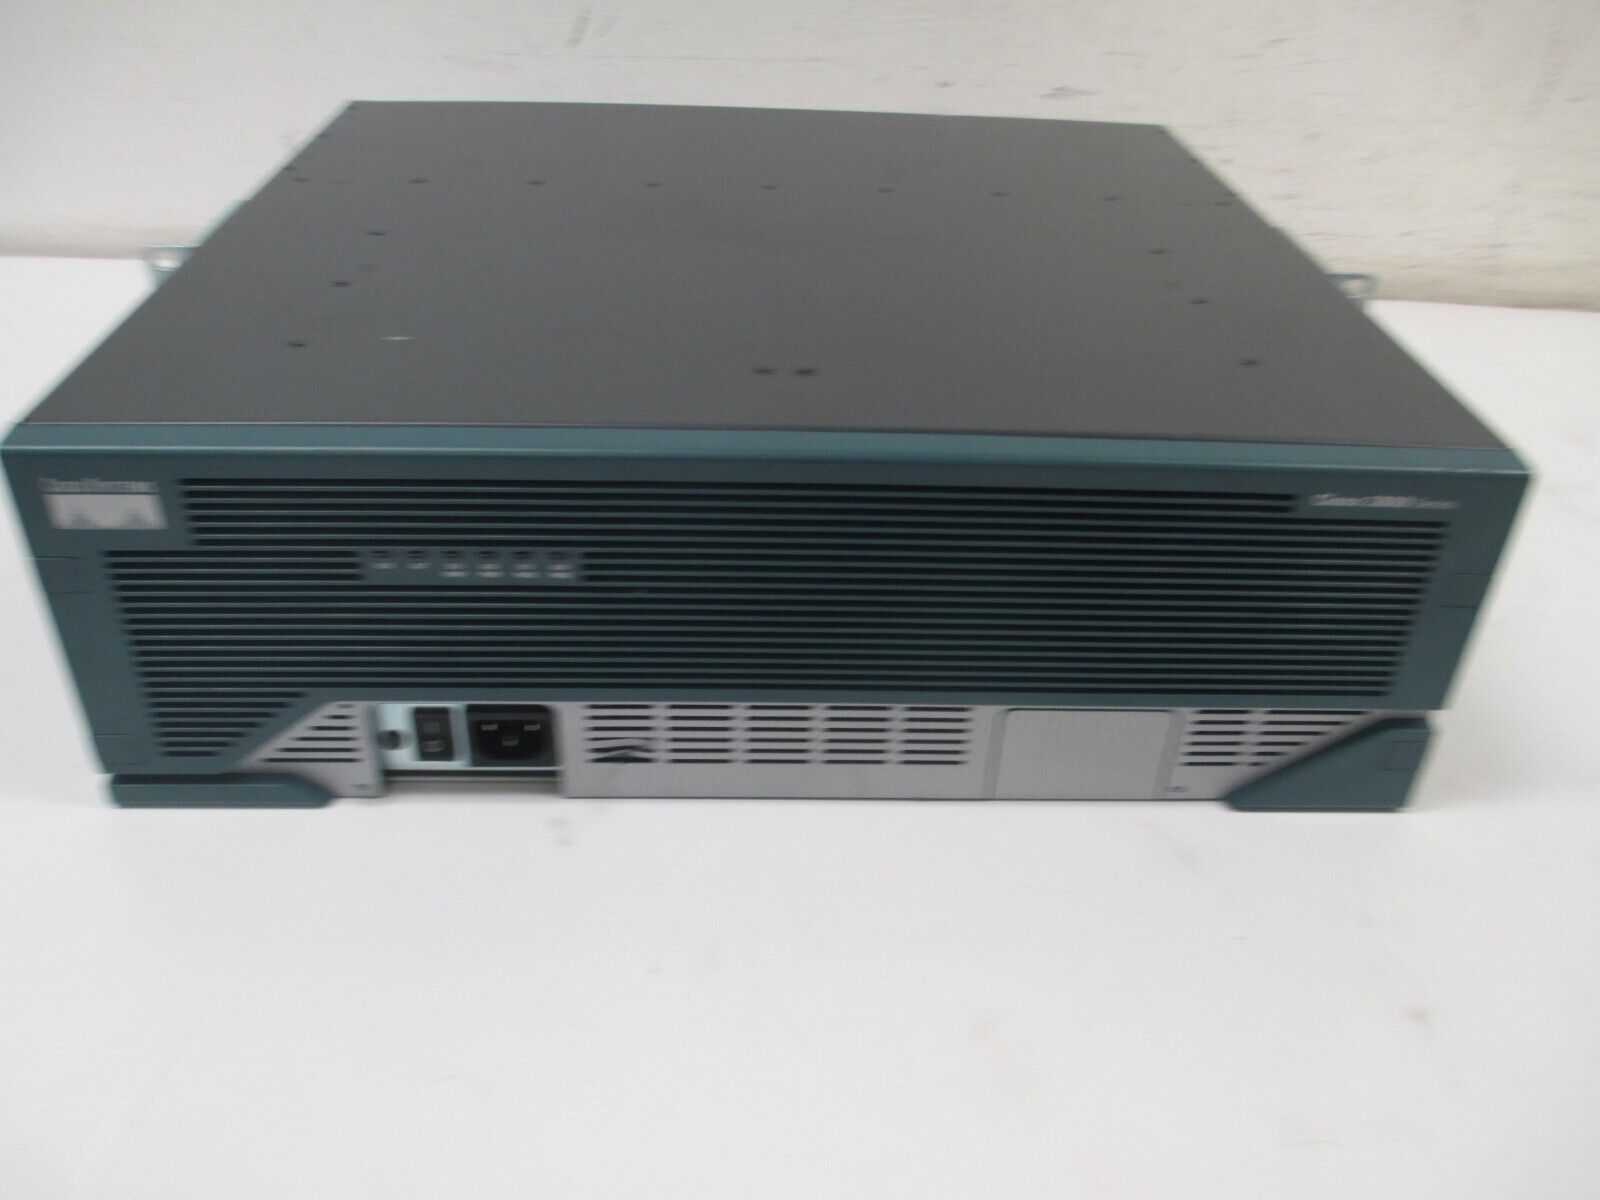 Cisco 3800 Series Cisco 3845 Integrated Router w/ Dual Power Supply